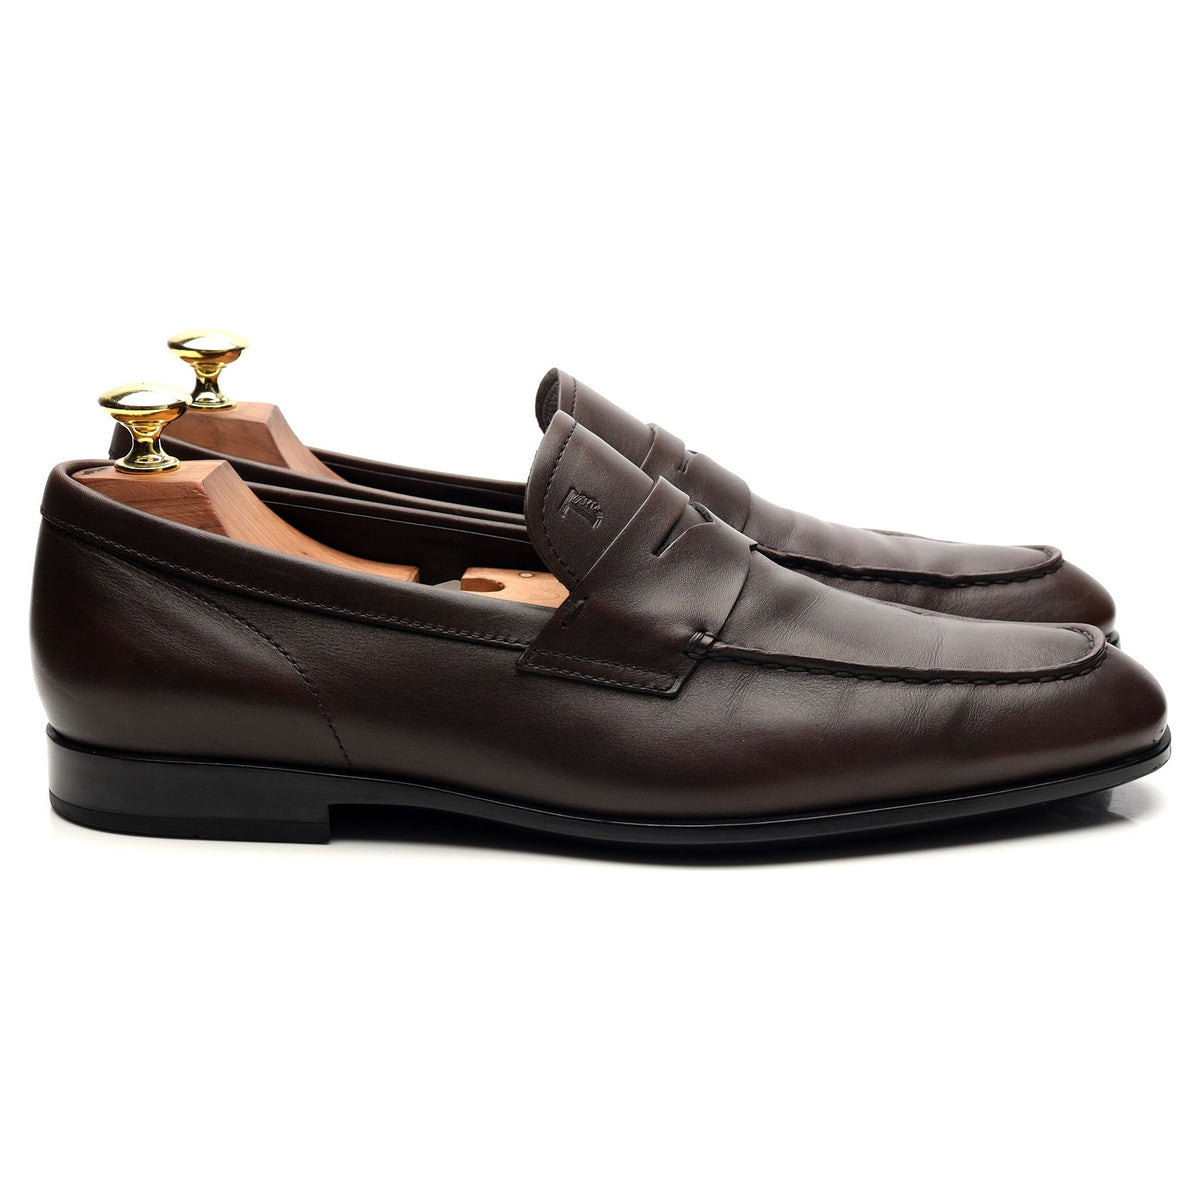 Dark Brown Leather Loafers UK 7